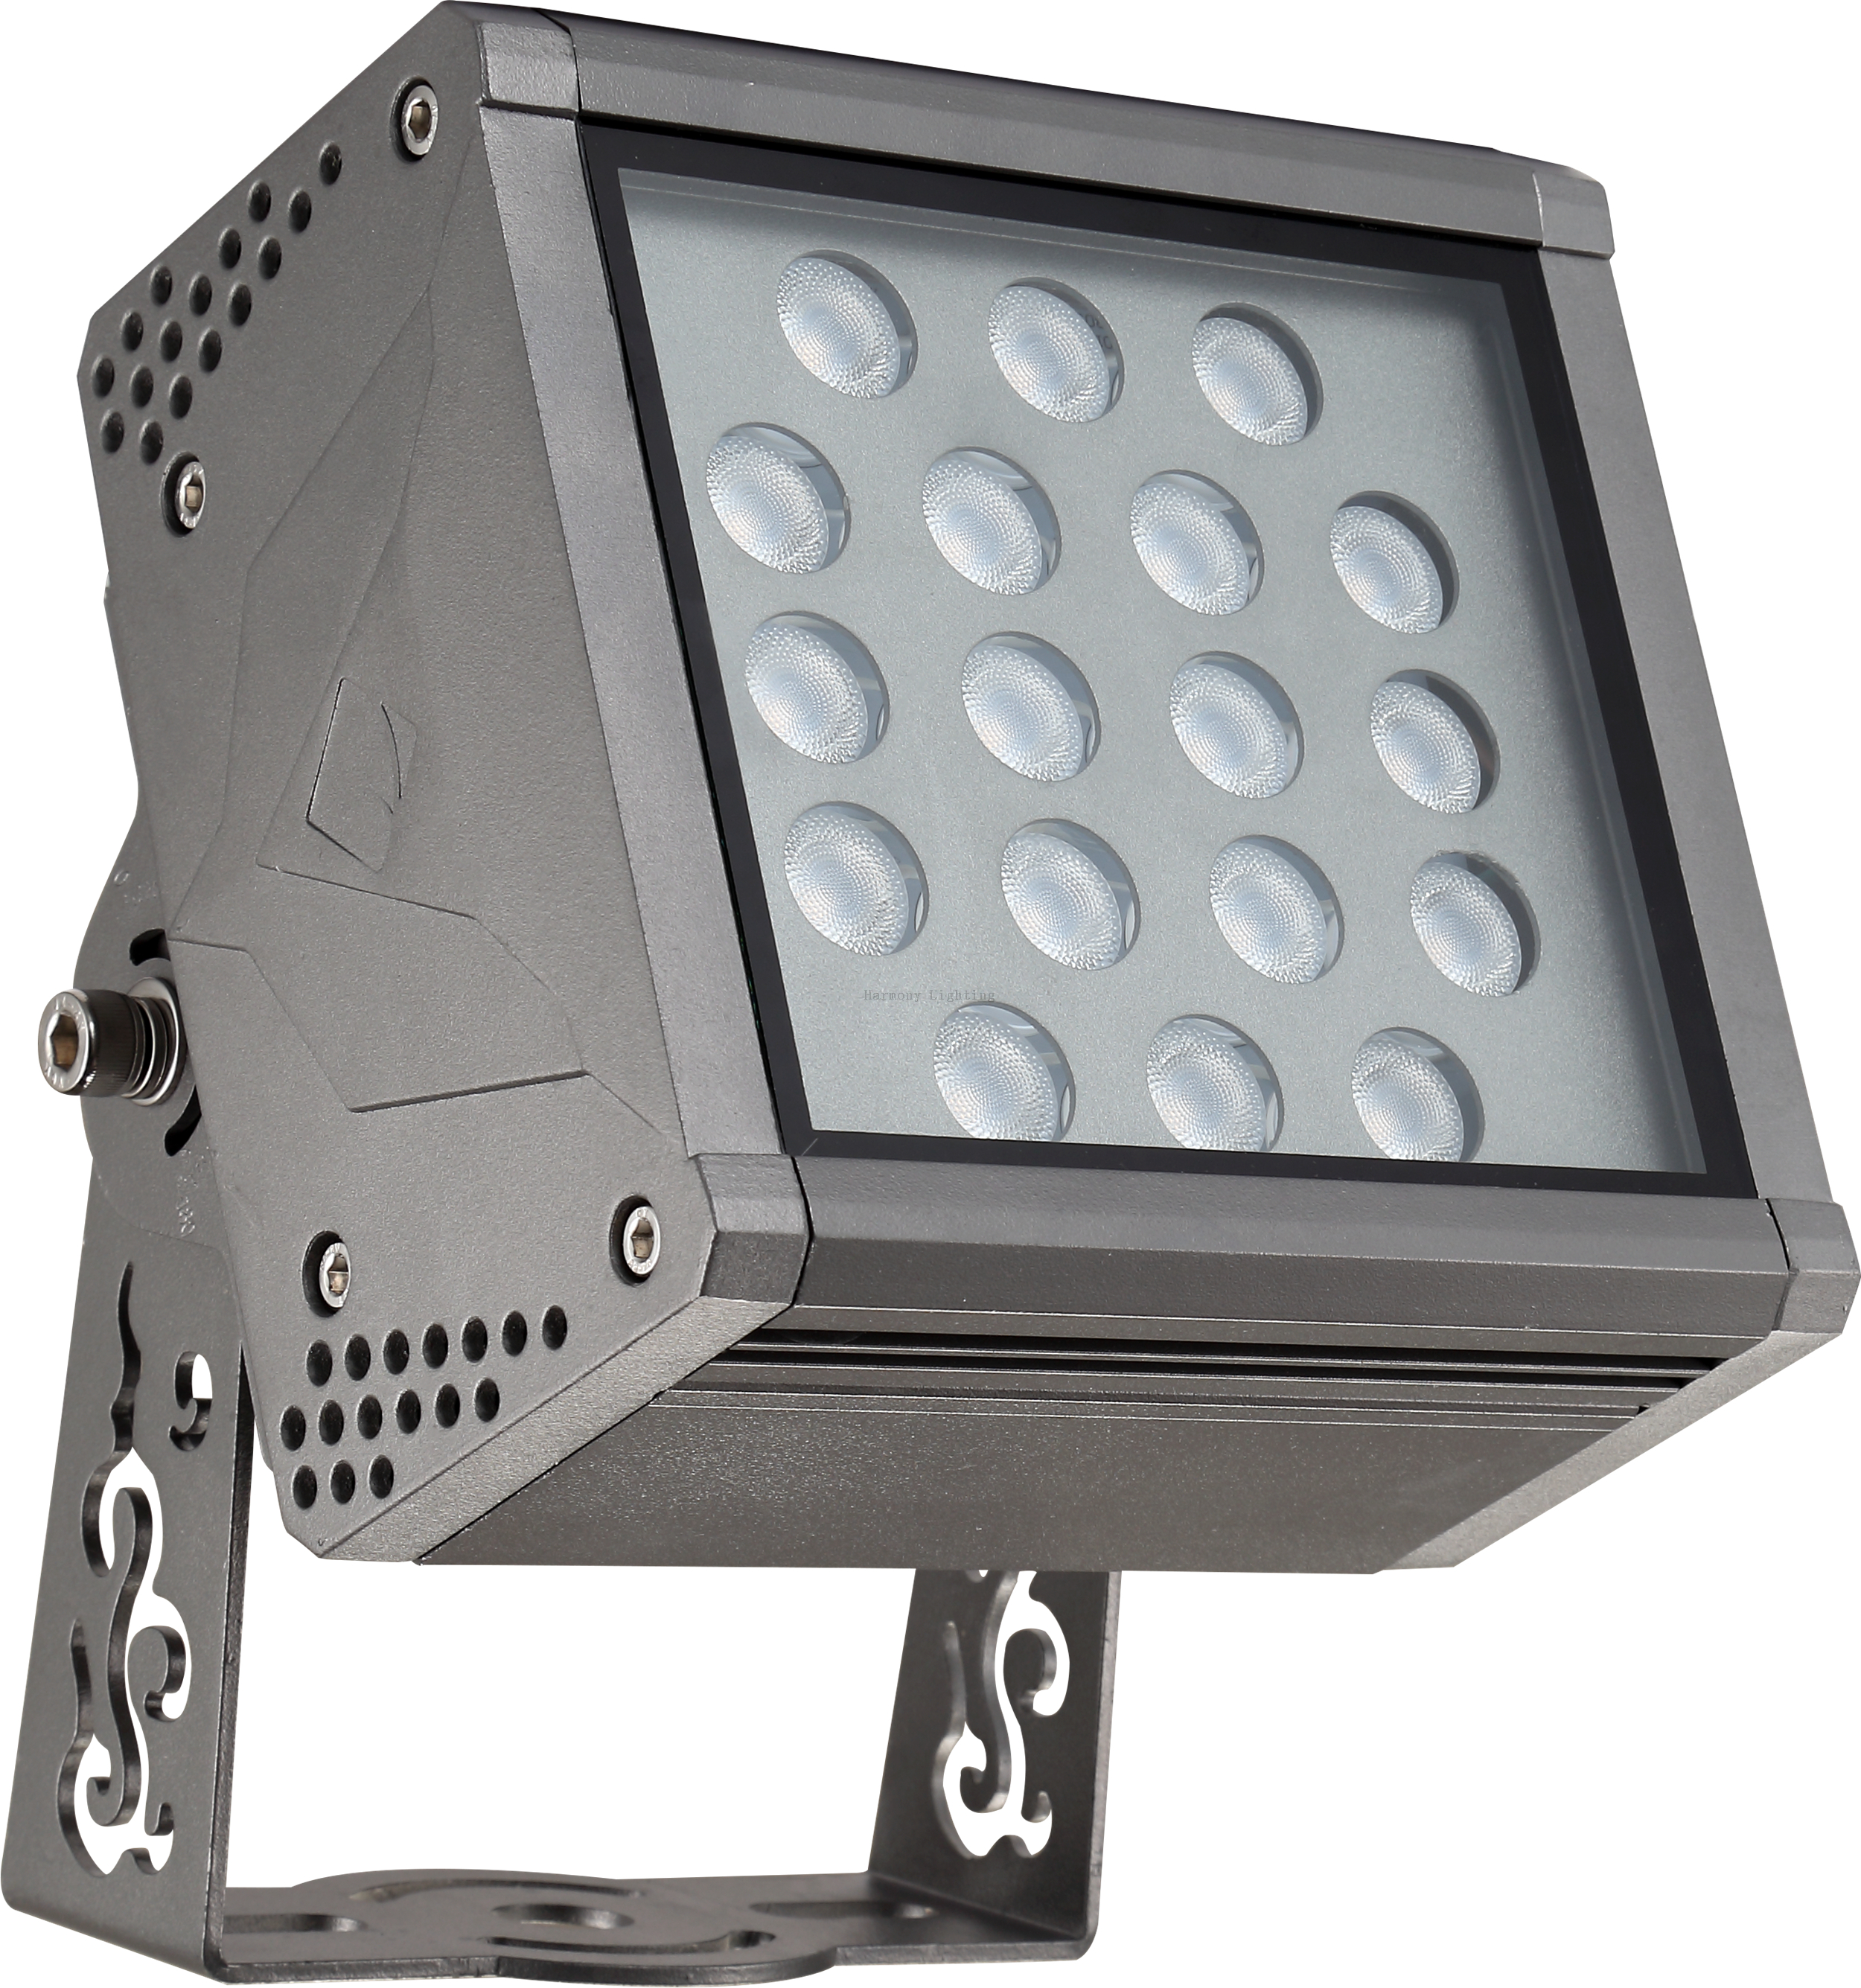 RH-P10B Building Outer Wall Lamp 192W IP66 Osram LED High Lumen Project Floodlight